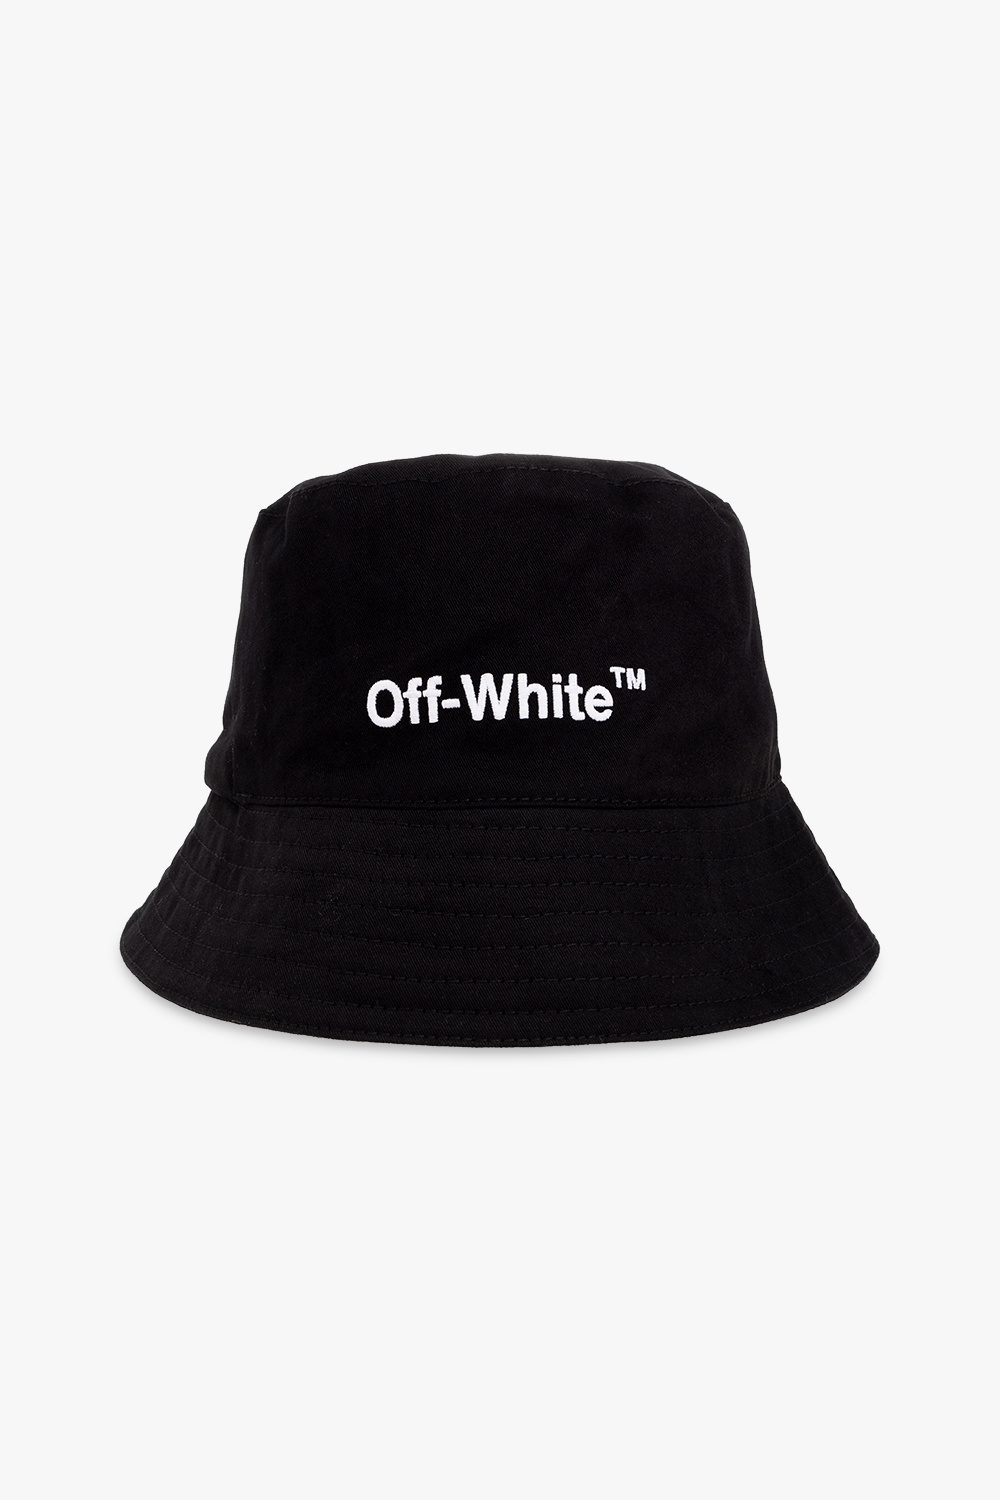 Off-White storage robes shoe-care caps pens